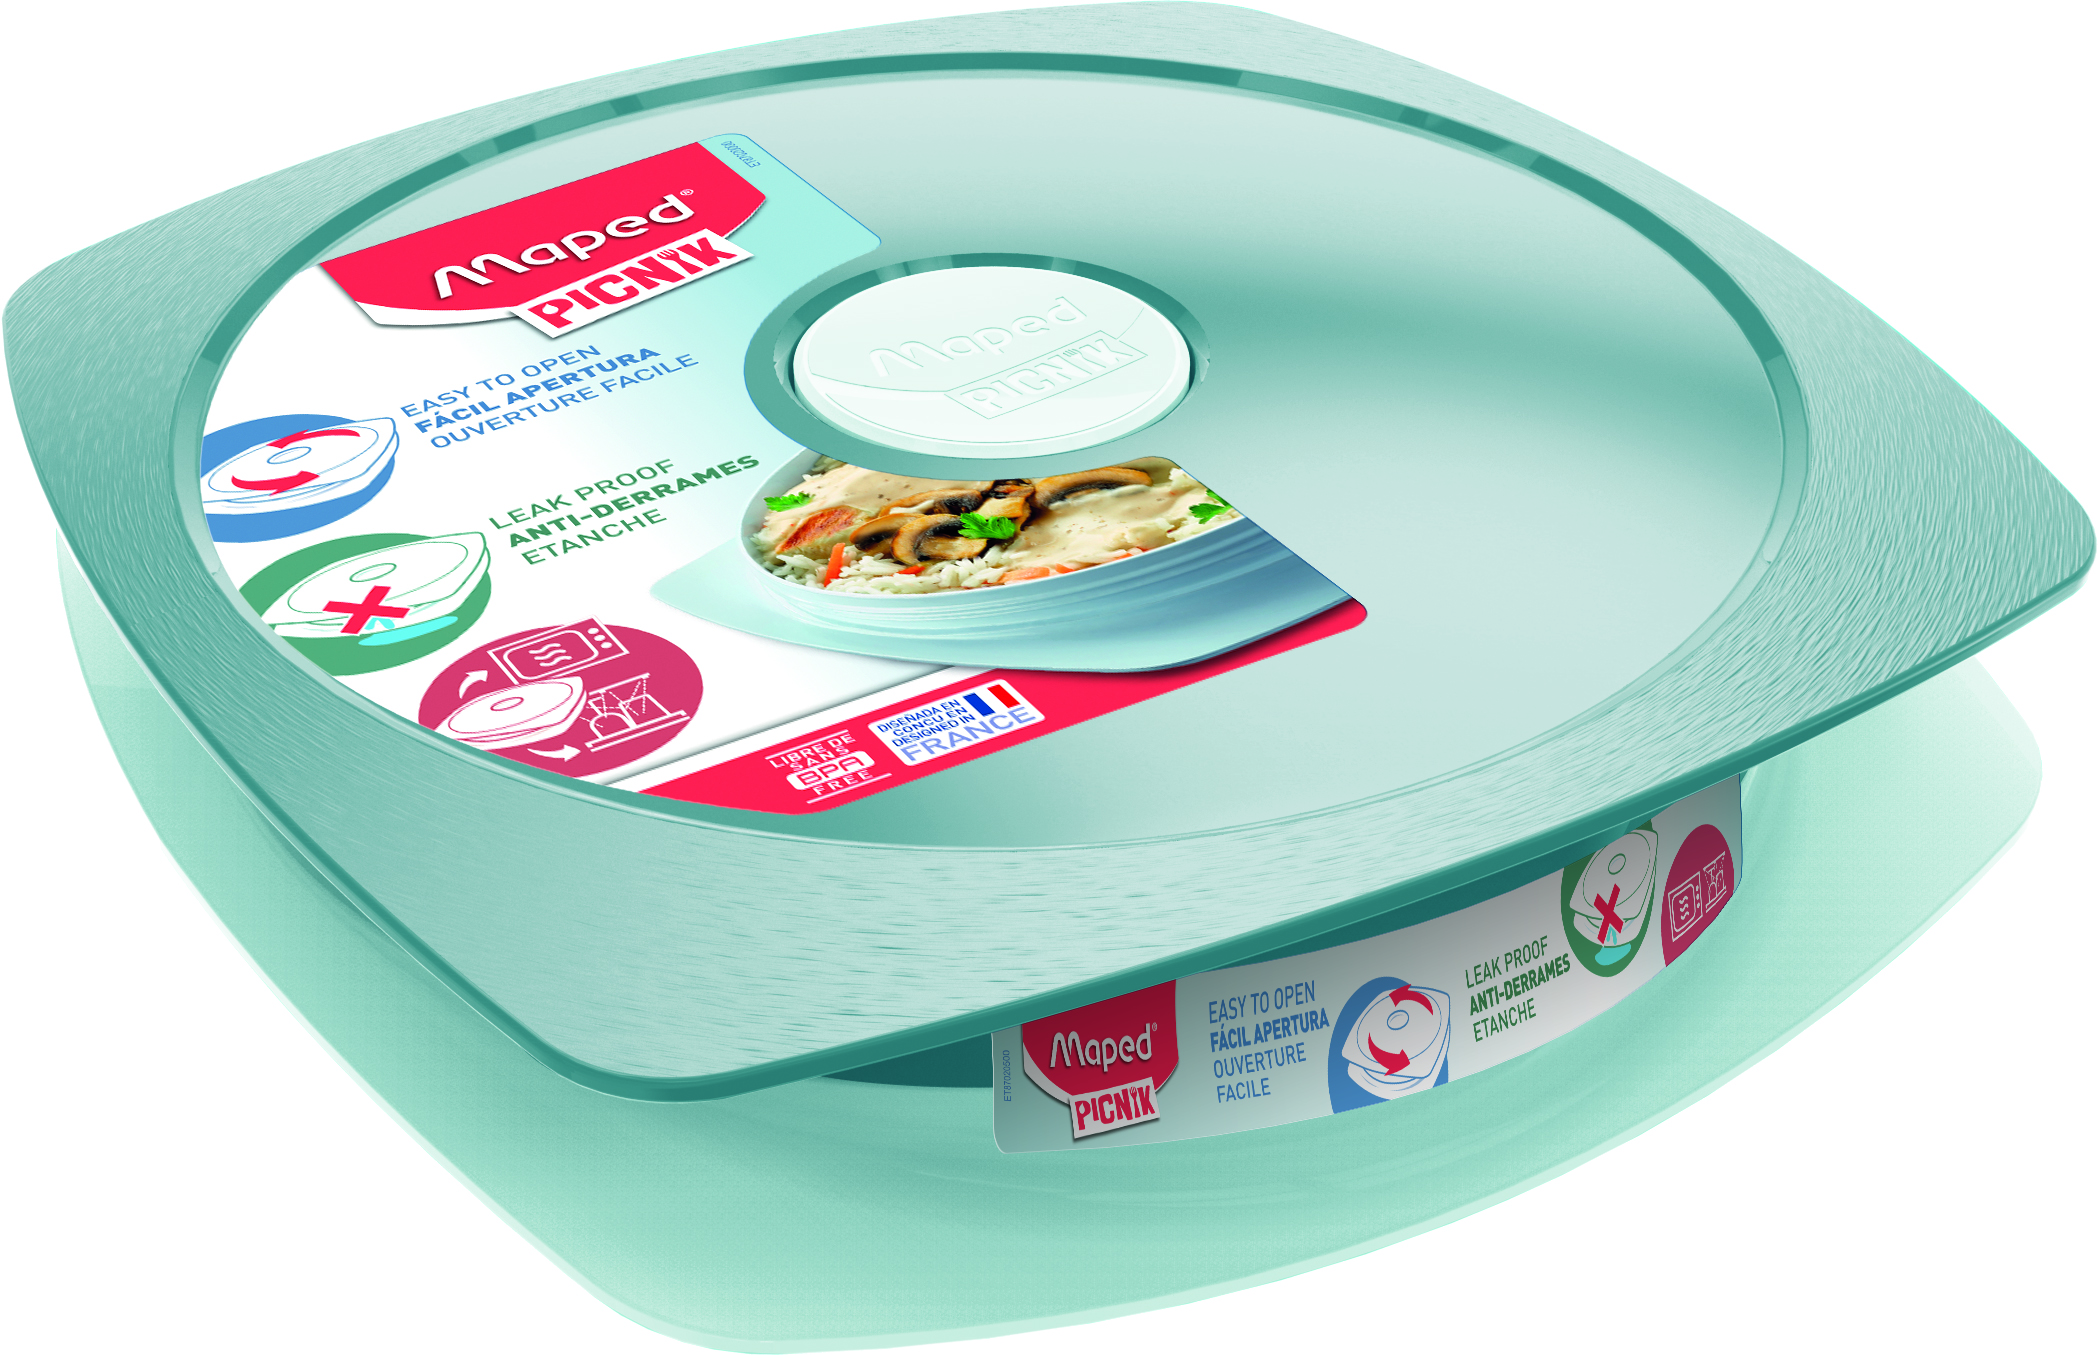 MAPED CONCEPT ADULT LUNCH PLATE EUCALYPTUS GREEN 900ML REF 870204